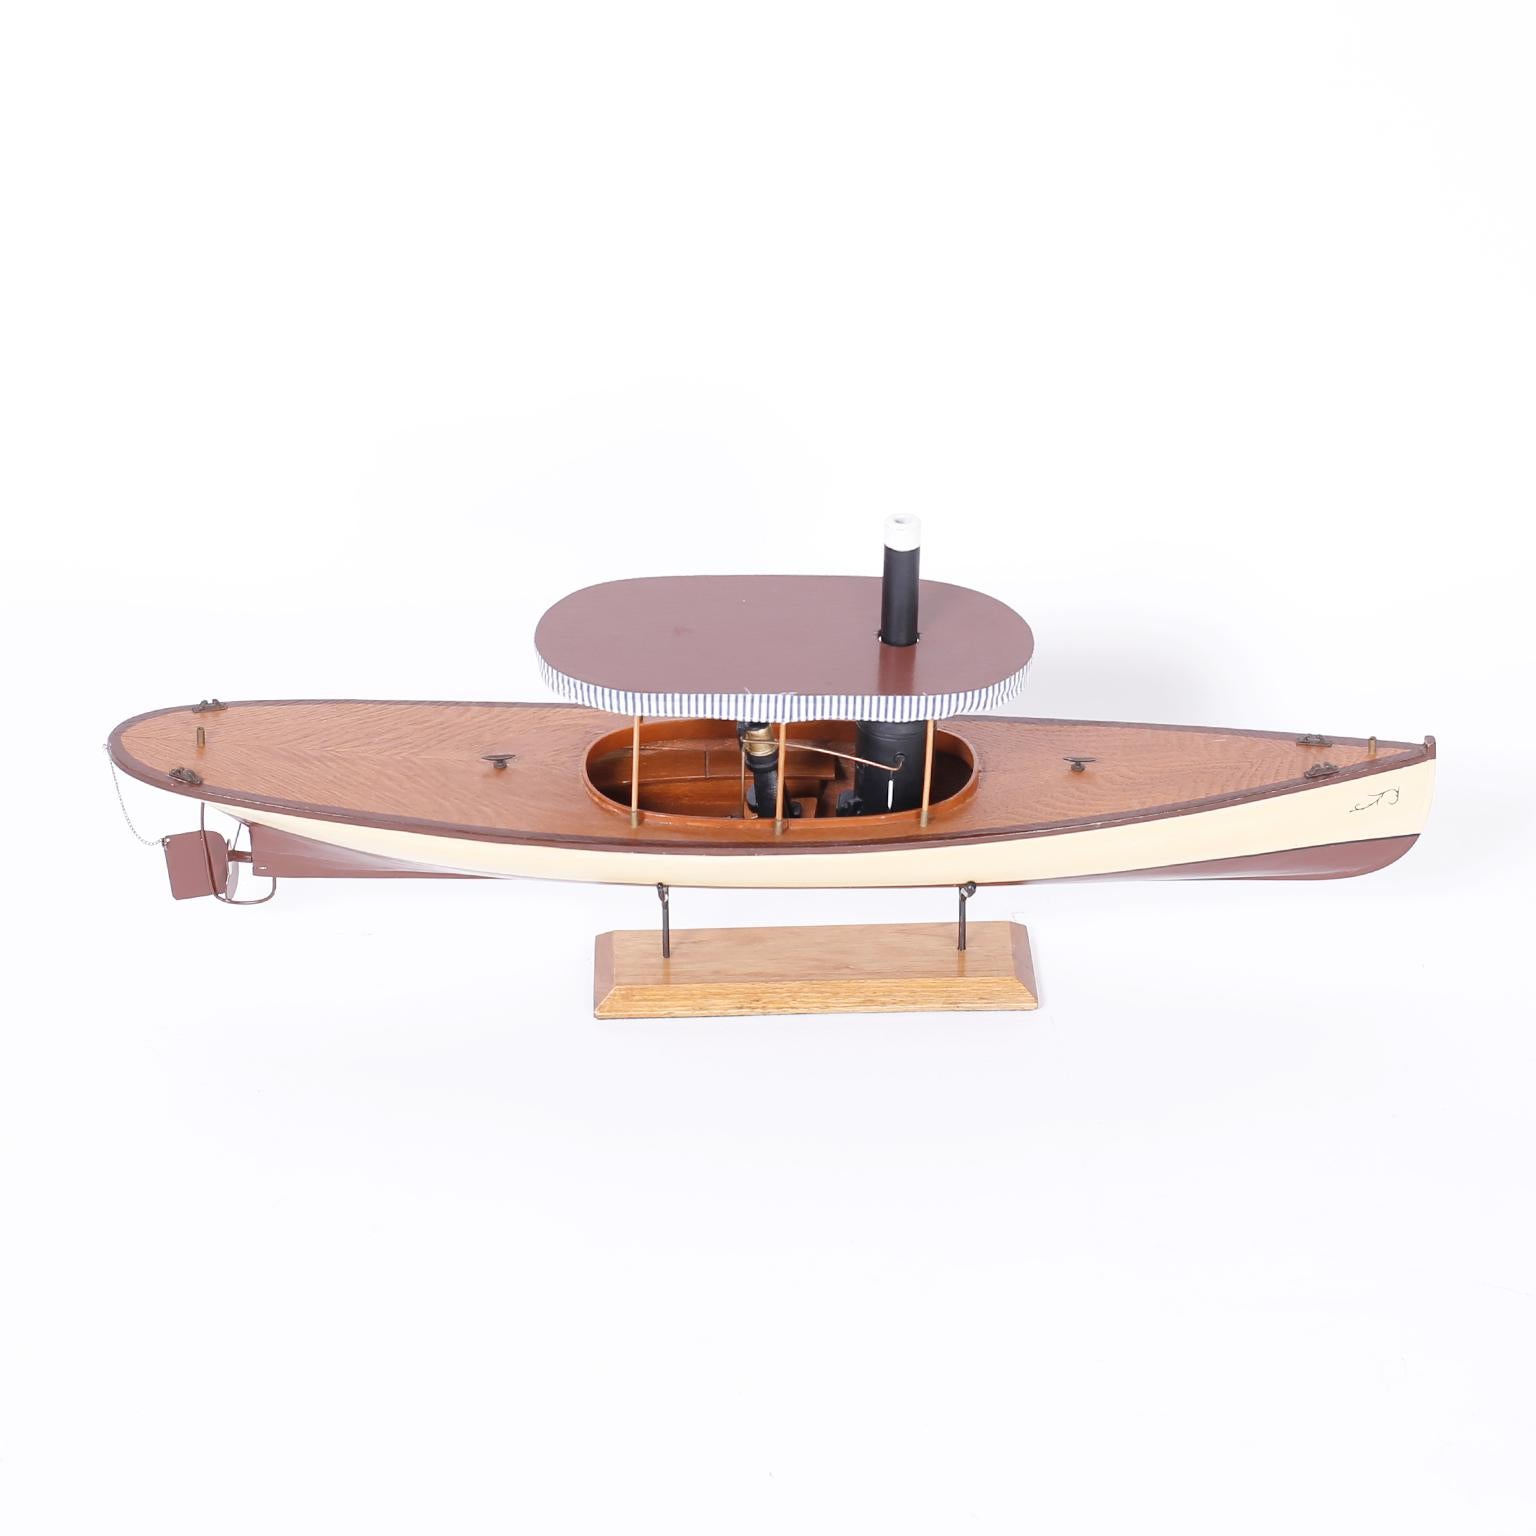 Model of a launch realistically crafted in mahogany, painted on the outside, complete with a steam engine replica, striped awning and presented on a mahogany stand.